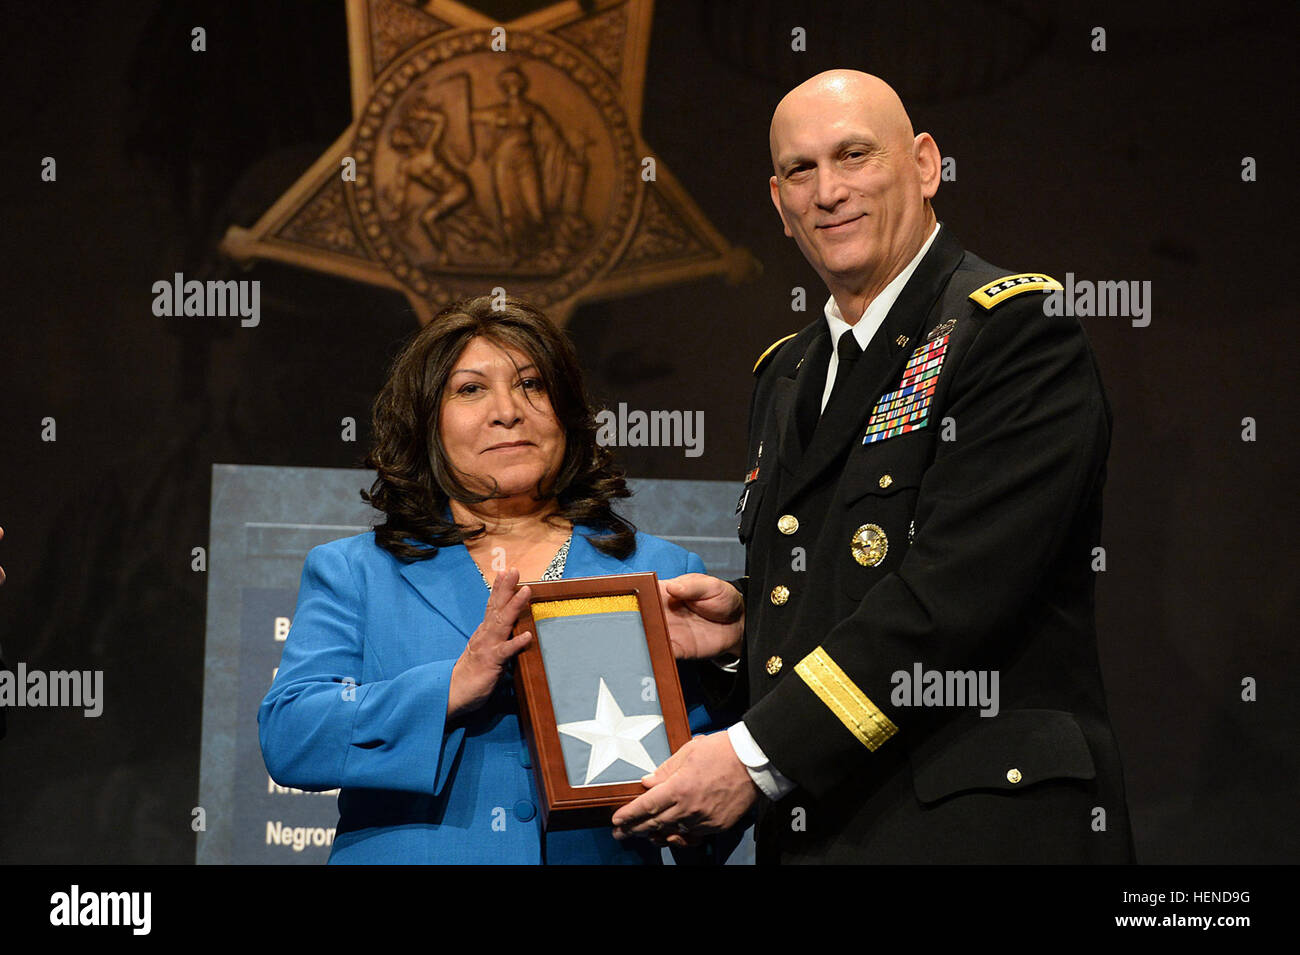 Chief of Staff of the Army, Gen. Raymond T. Odierno presents the Medal of Honor Flag to Miriam Adams, on behalf of her uncle, Pvt. Joe Gandara, one of 24 Army veterans honored during the Valor 24 Hall of Heroes Induction ceremony, held at the Pentagon, Washington D.C., March 19, 2014. (U.S. Army photo by Mr. Leroy Council/Released) Valor 24 Hall of Heroes ceremony, presentation for Joe Gandara Stock Photo